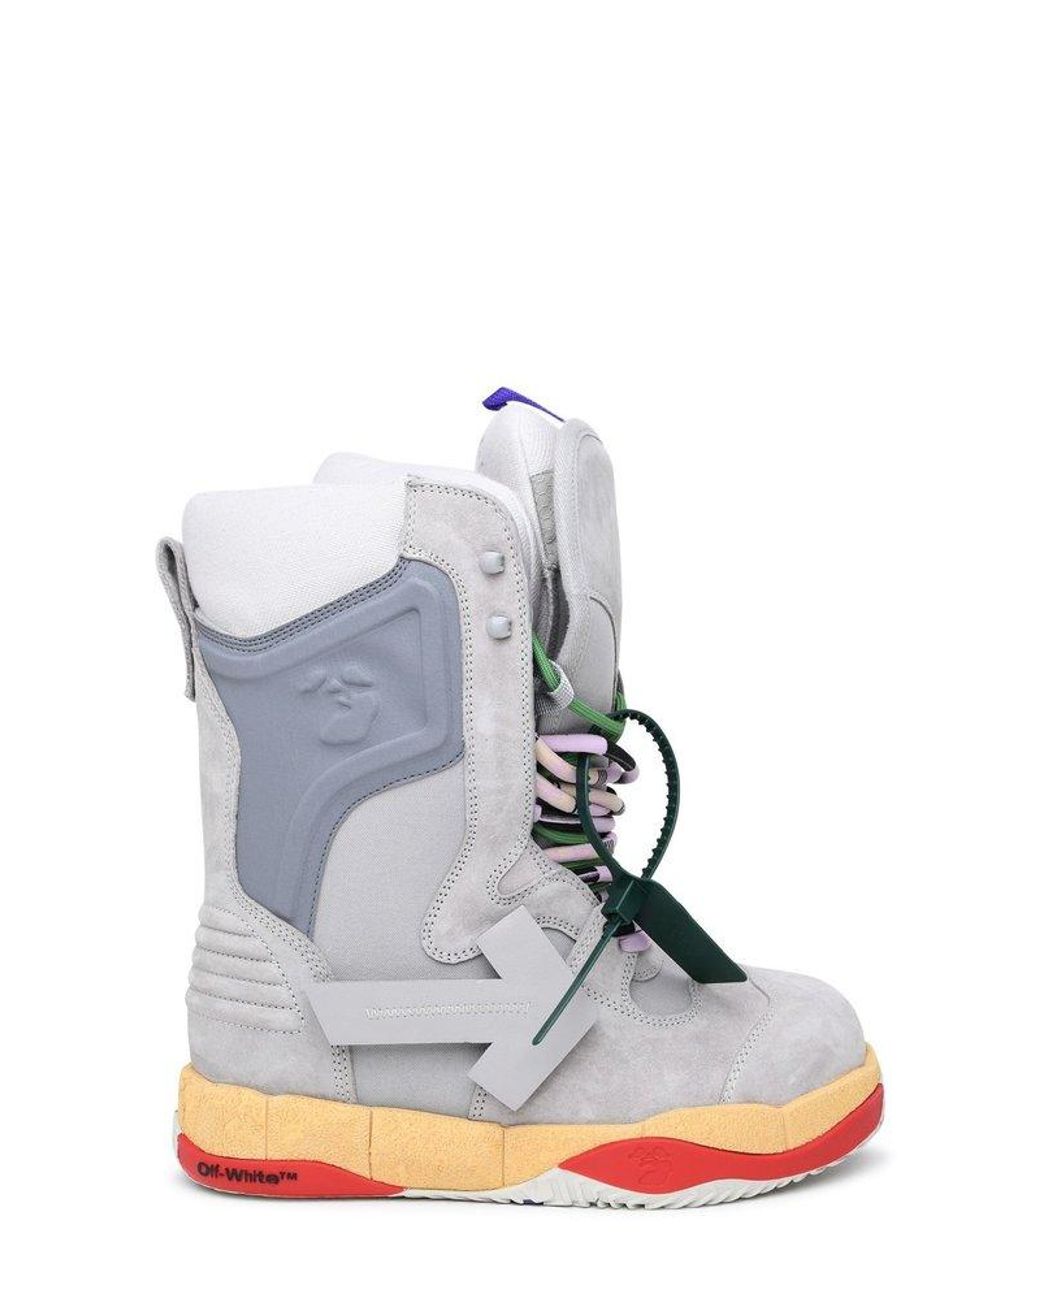 Off-White c/o Virgil Abloh Snowboard Boots in Blue | Lyst